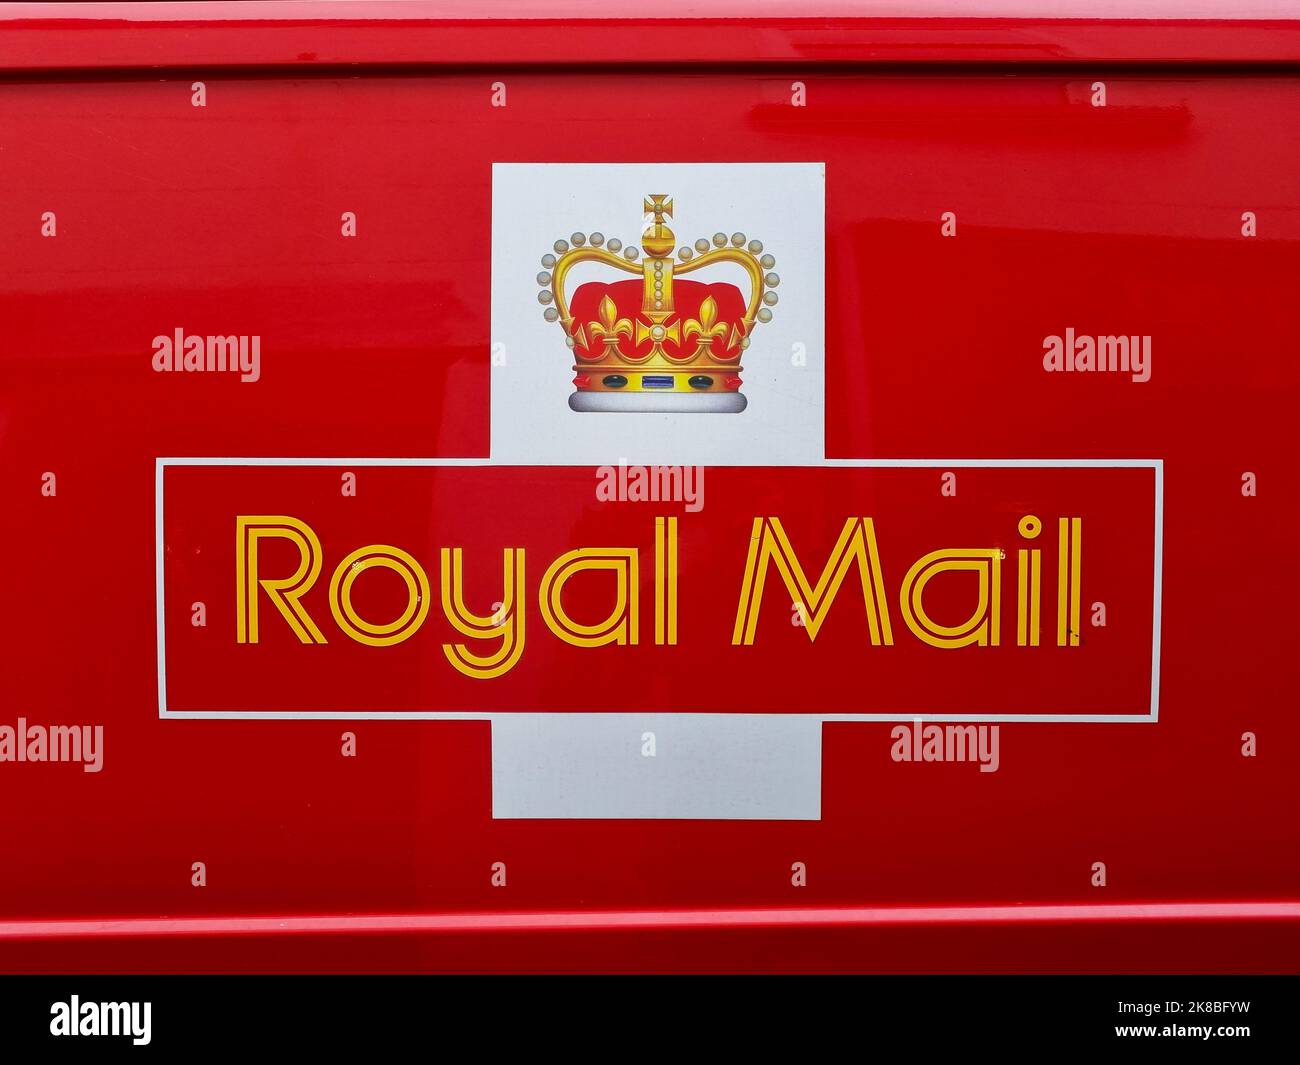 Exeter, UK - October 2022: The logo of Royal Mail (International Distributions Services plc), on the side of one of their iconic red delivery vans Stock Photo